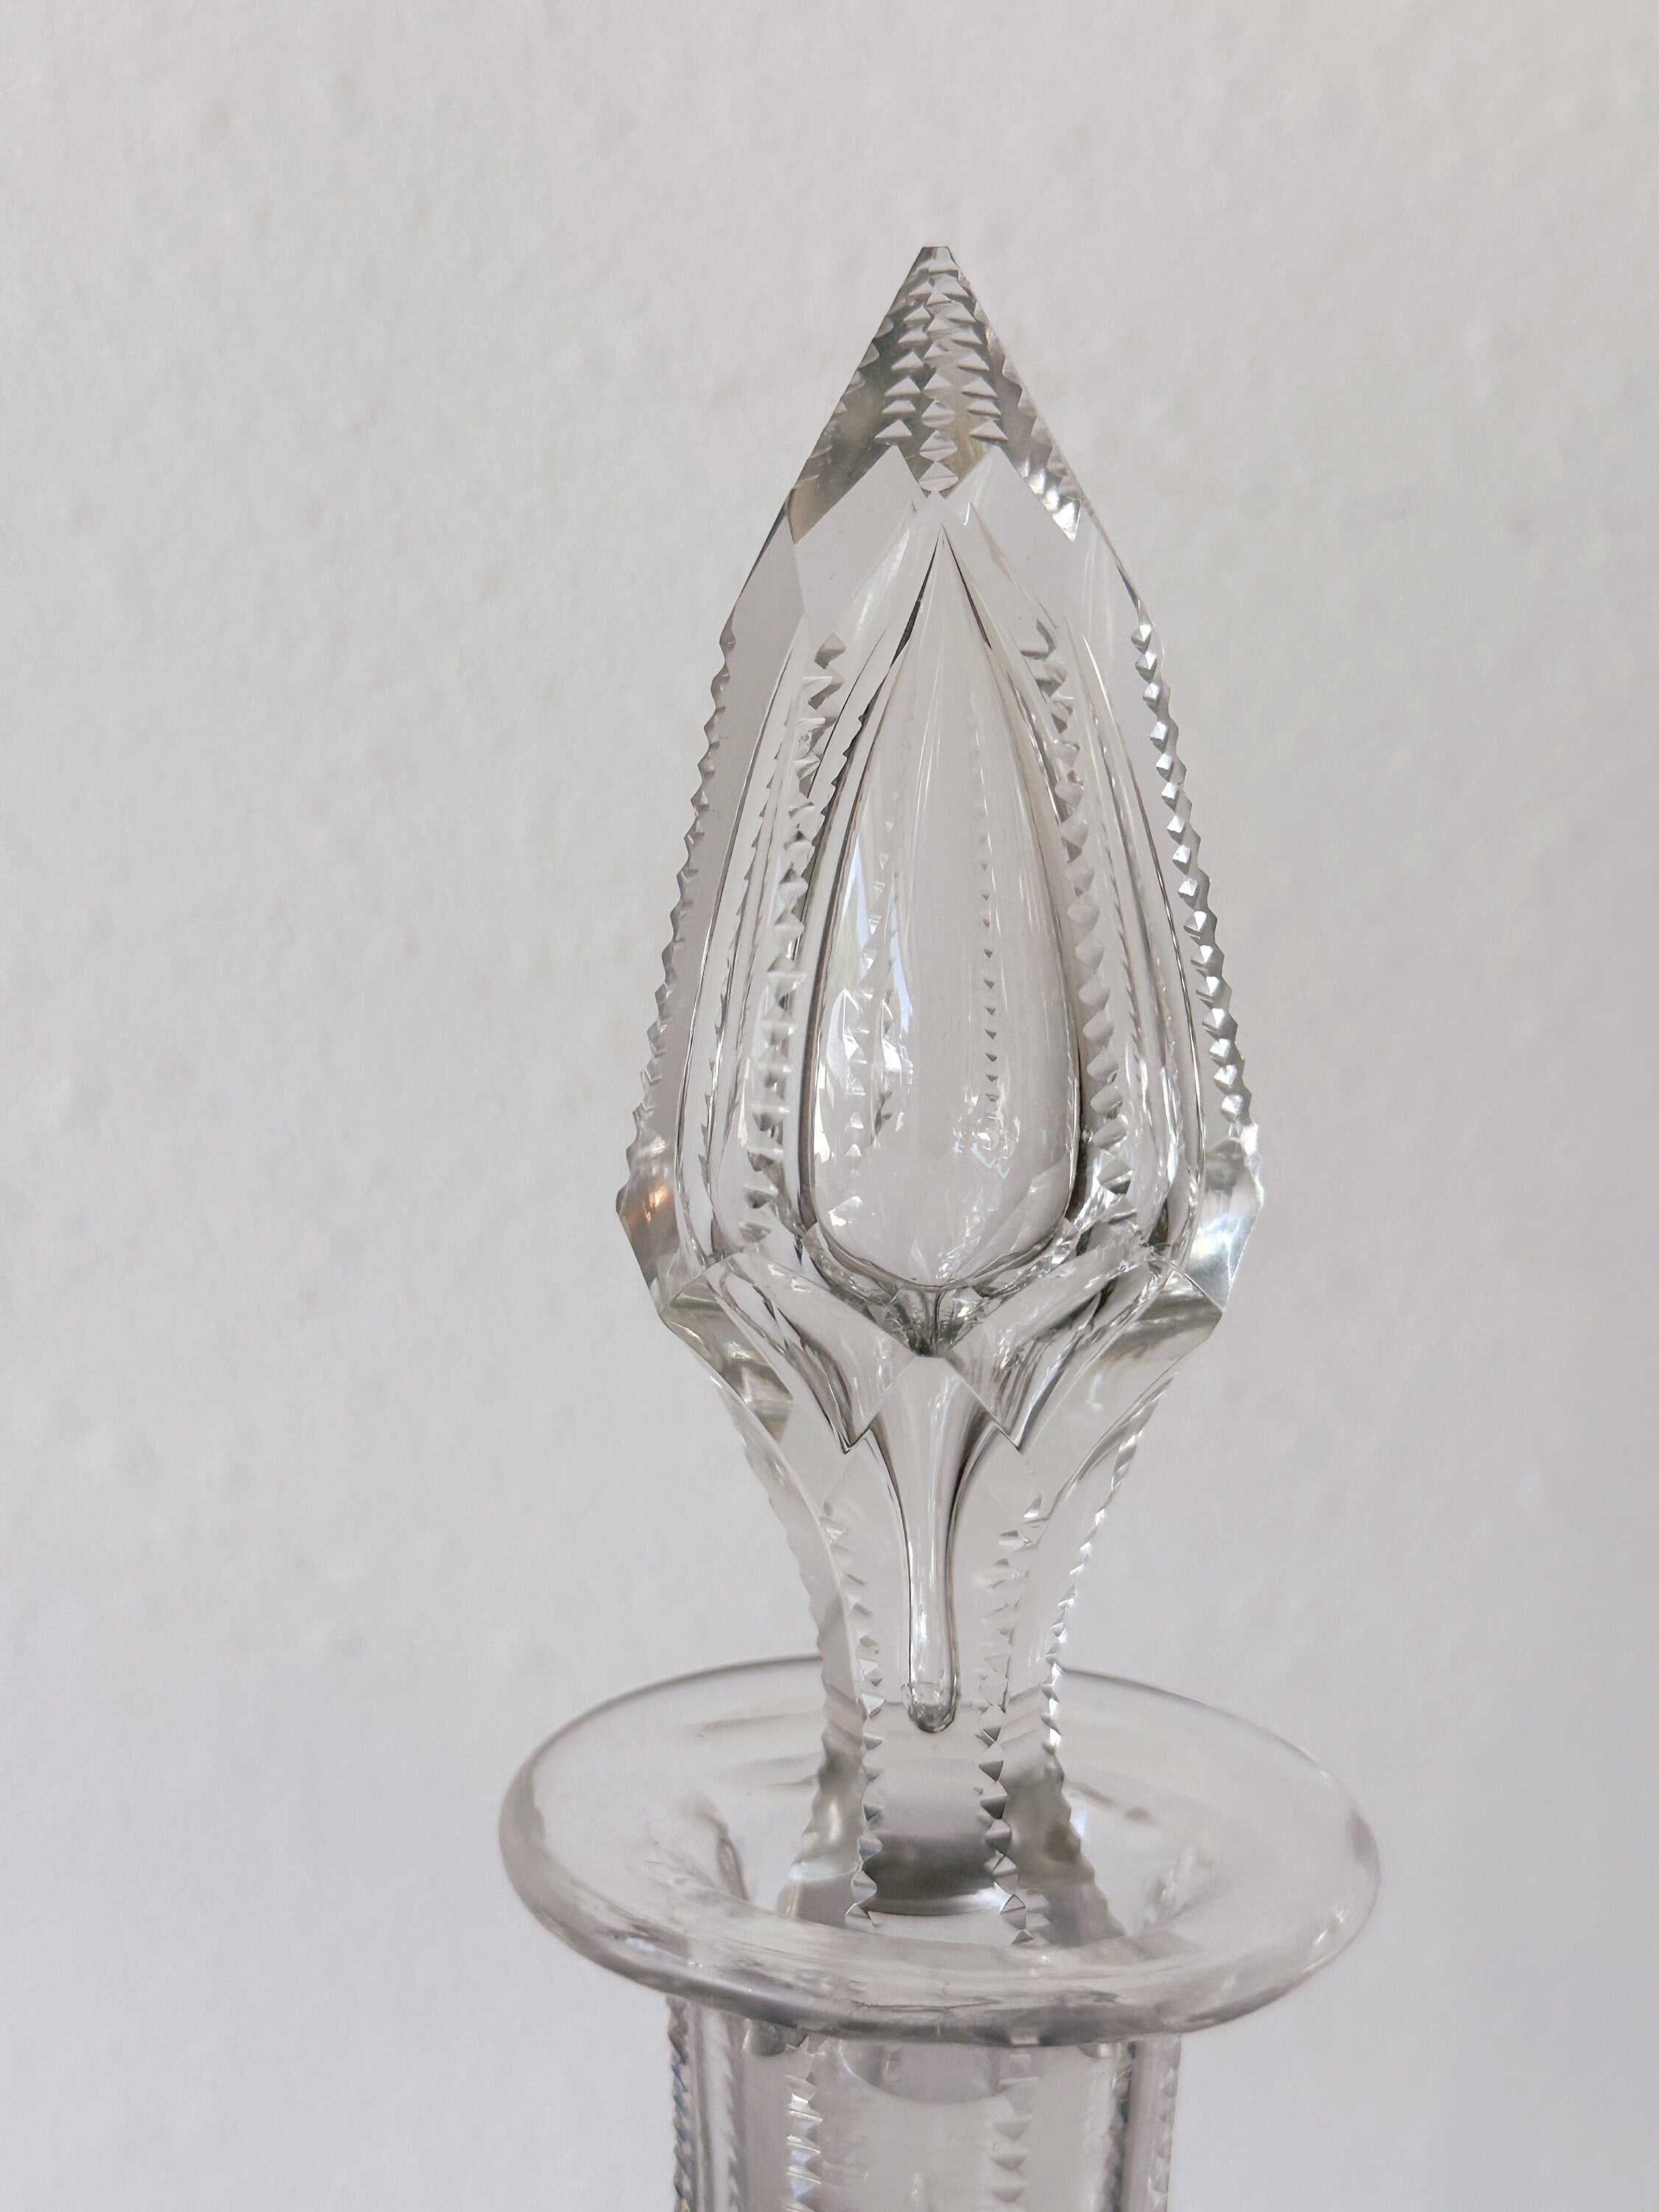 Vintage 80s Tall Bohemian Cut Obelisk Shaped Crystal Decanter with Hand Cut Stopper | 15" Tall Liquor Decanter Barware | Father's Day Gift